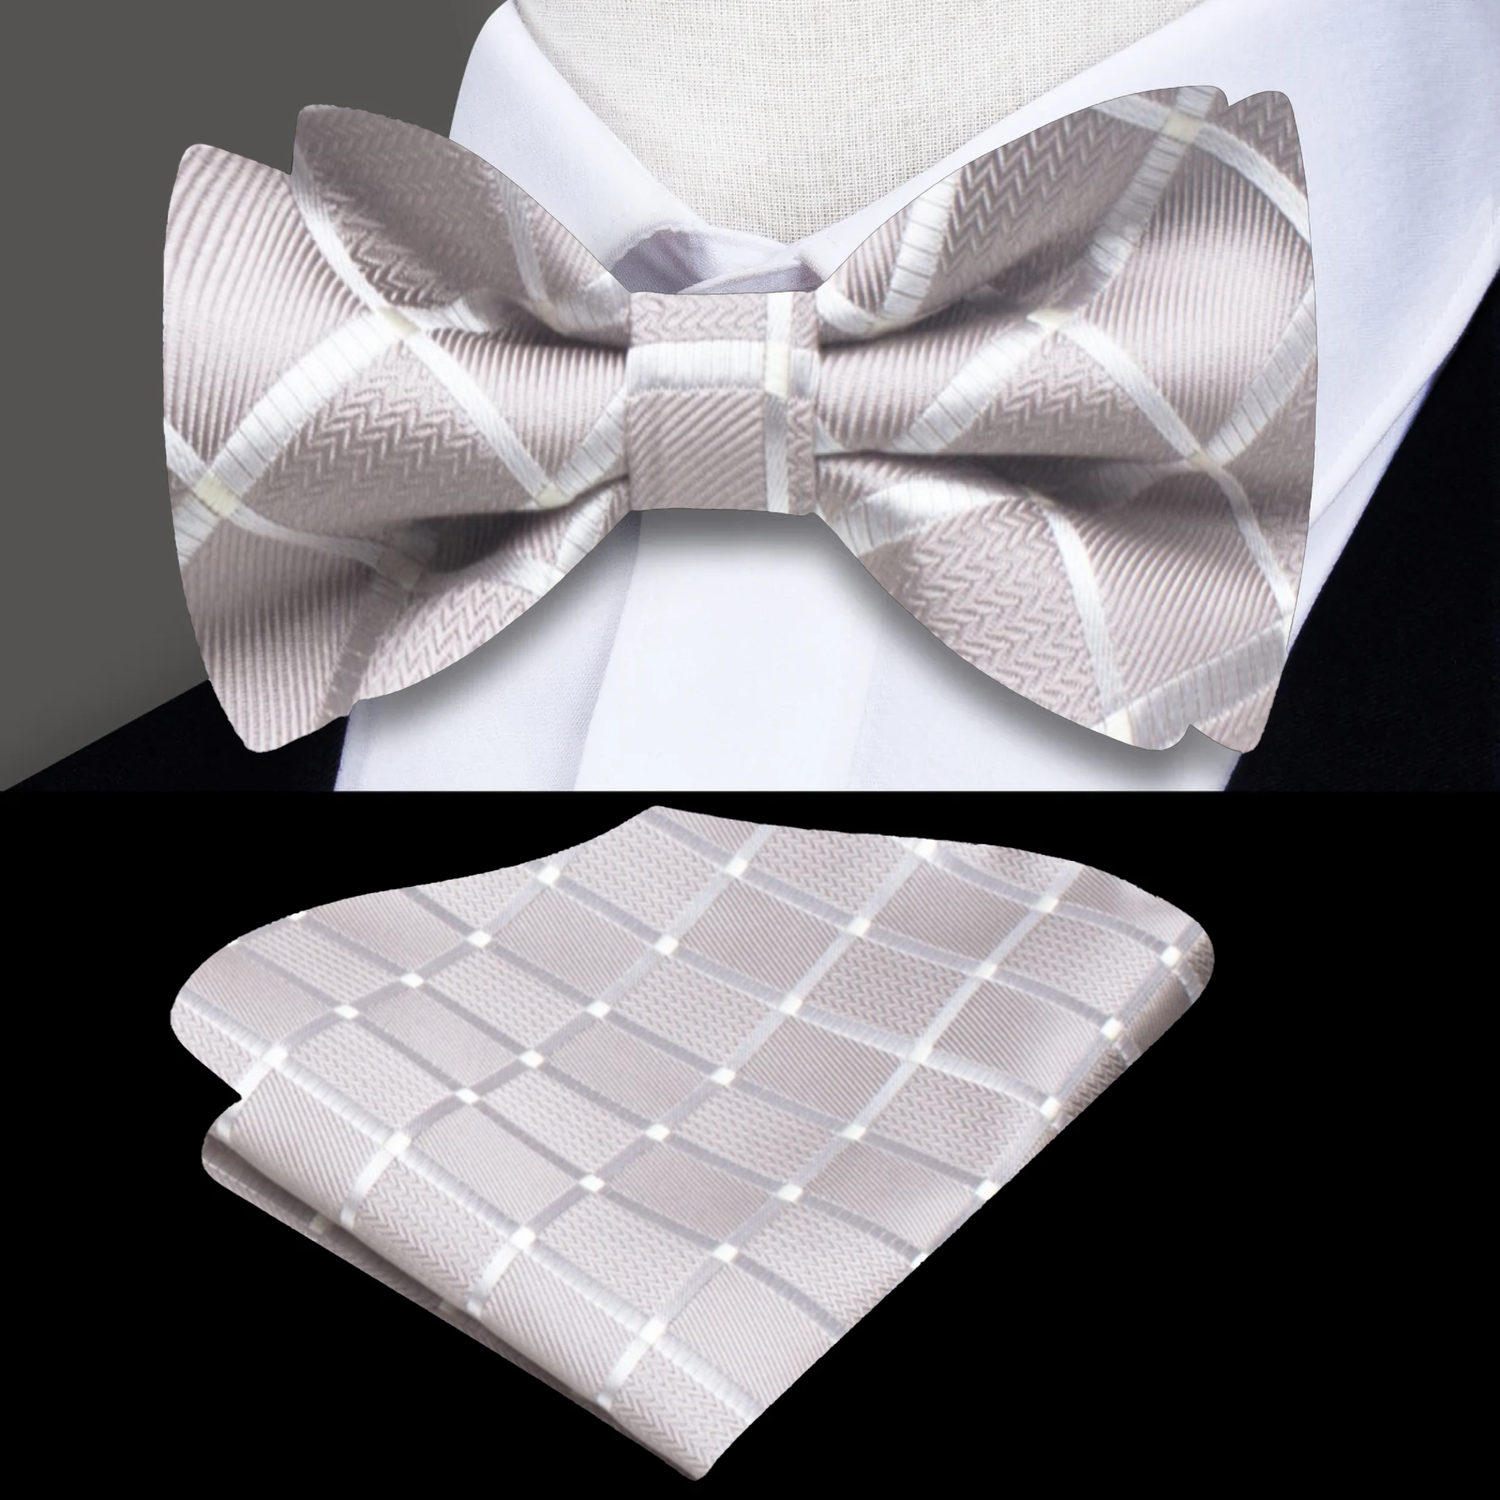 Main Pearl Squares Bow Tie and Matching Square